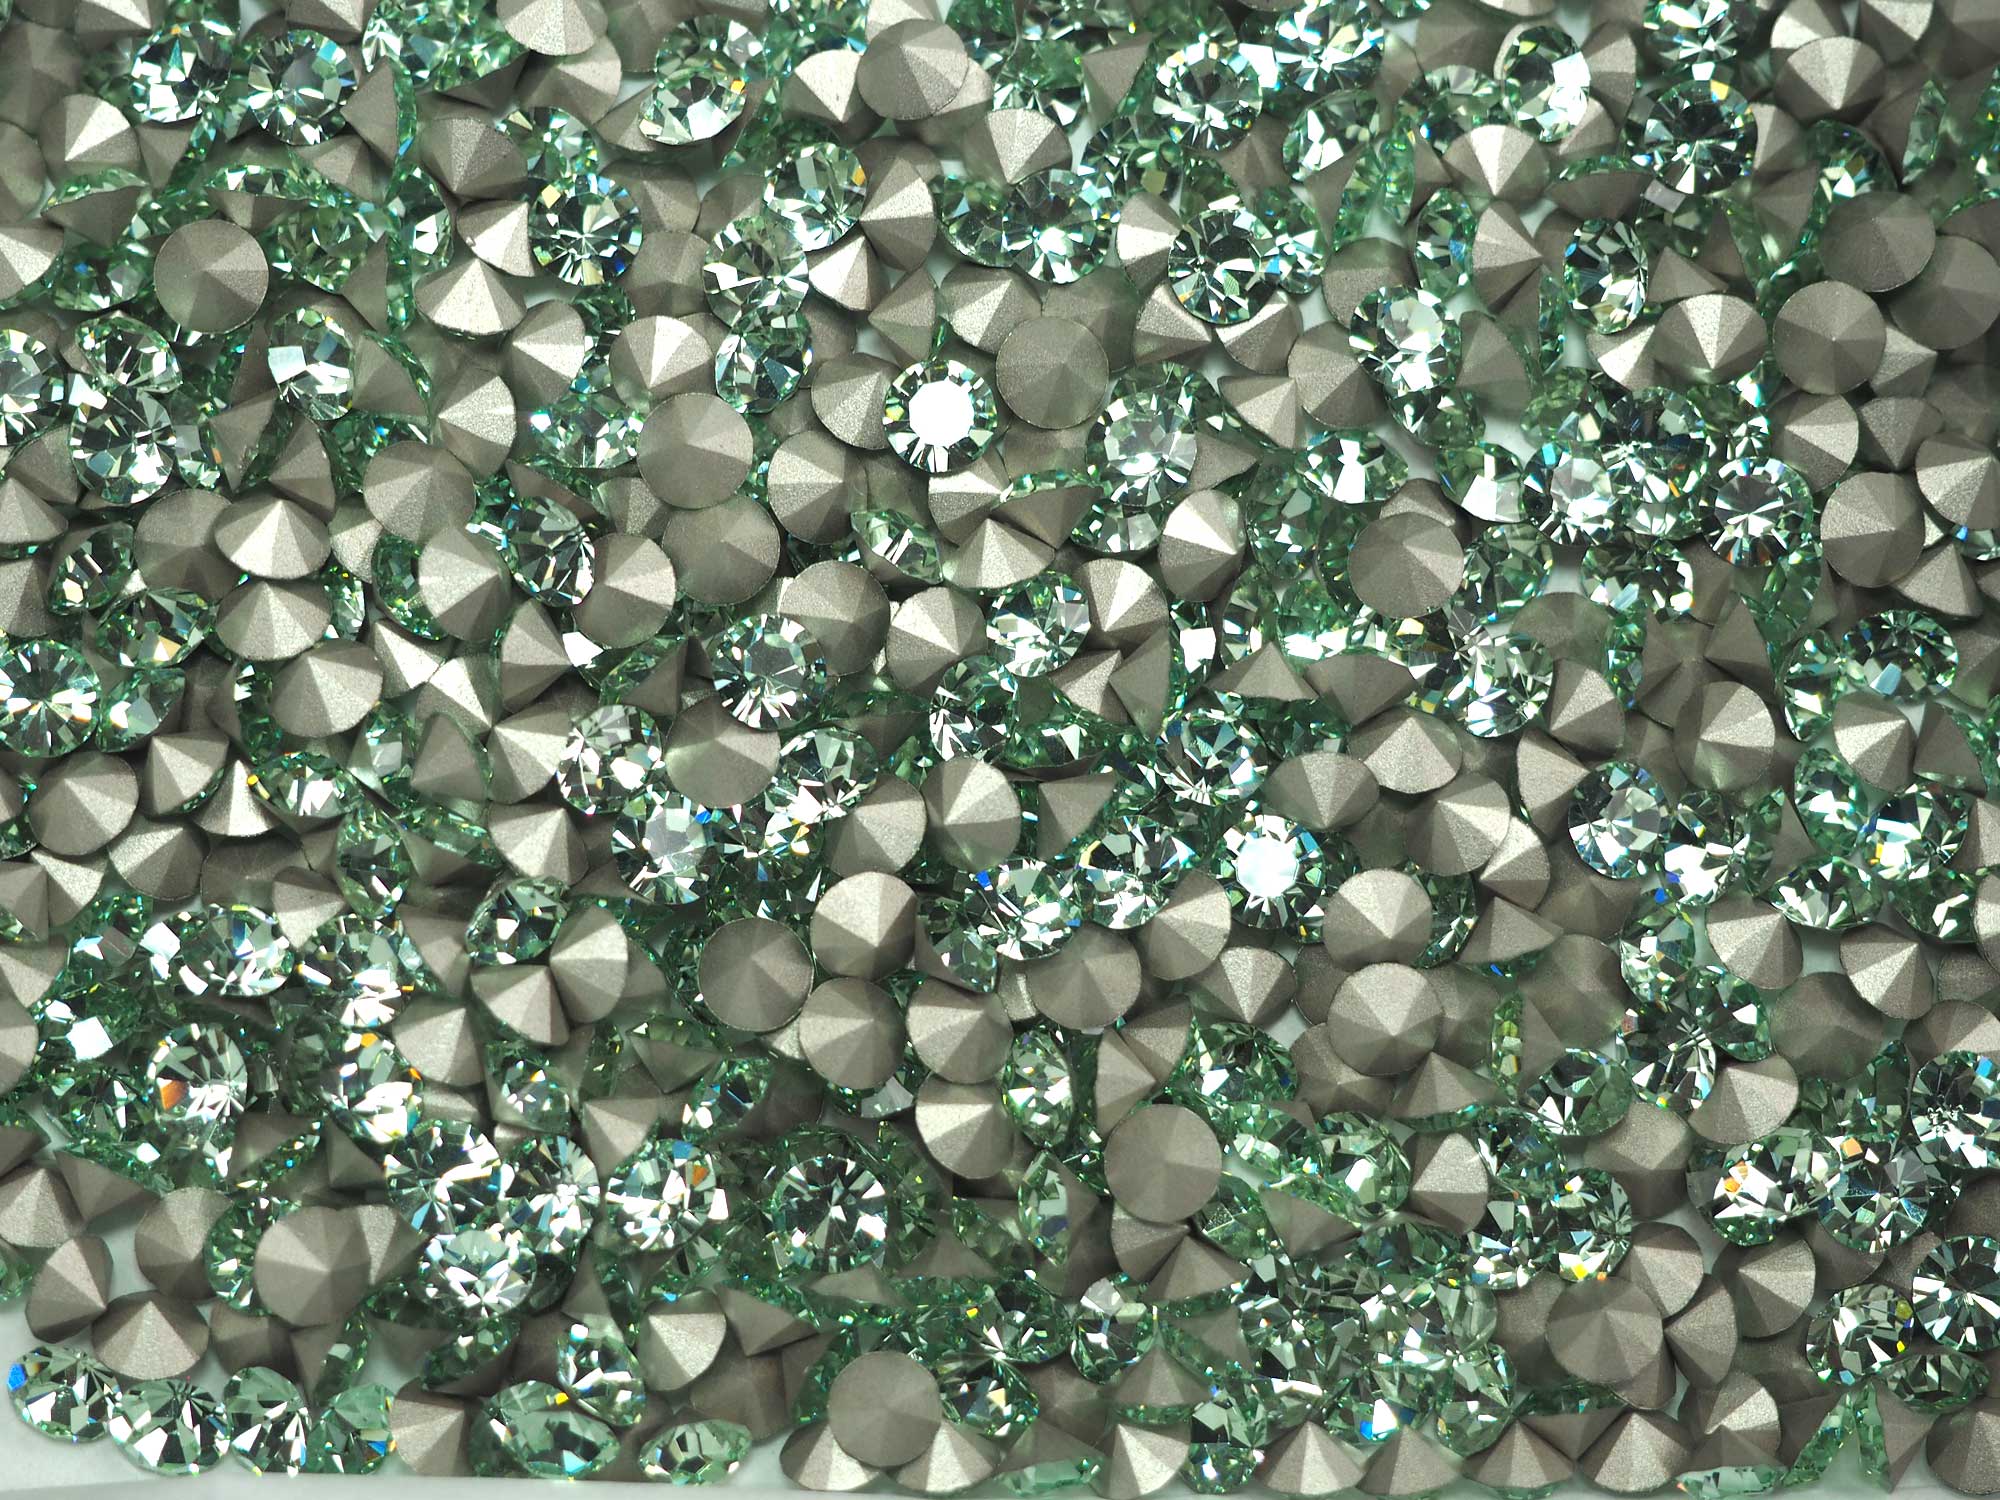 Chrysolite, Preciosa Genuine Czech MAXIMA Pointed Back Chatons in size ss23 (5.2mm, 0.2inch), 72 pieces, Silver Foiled, P605